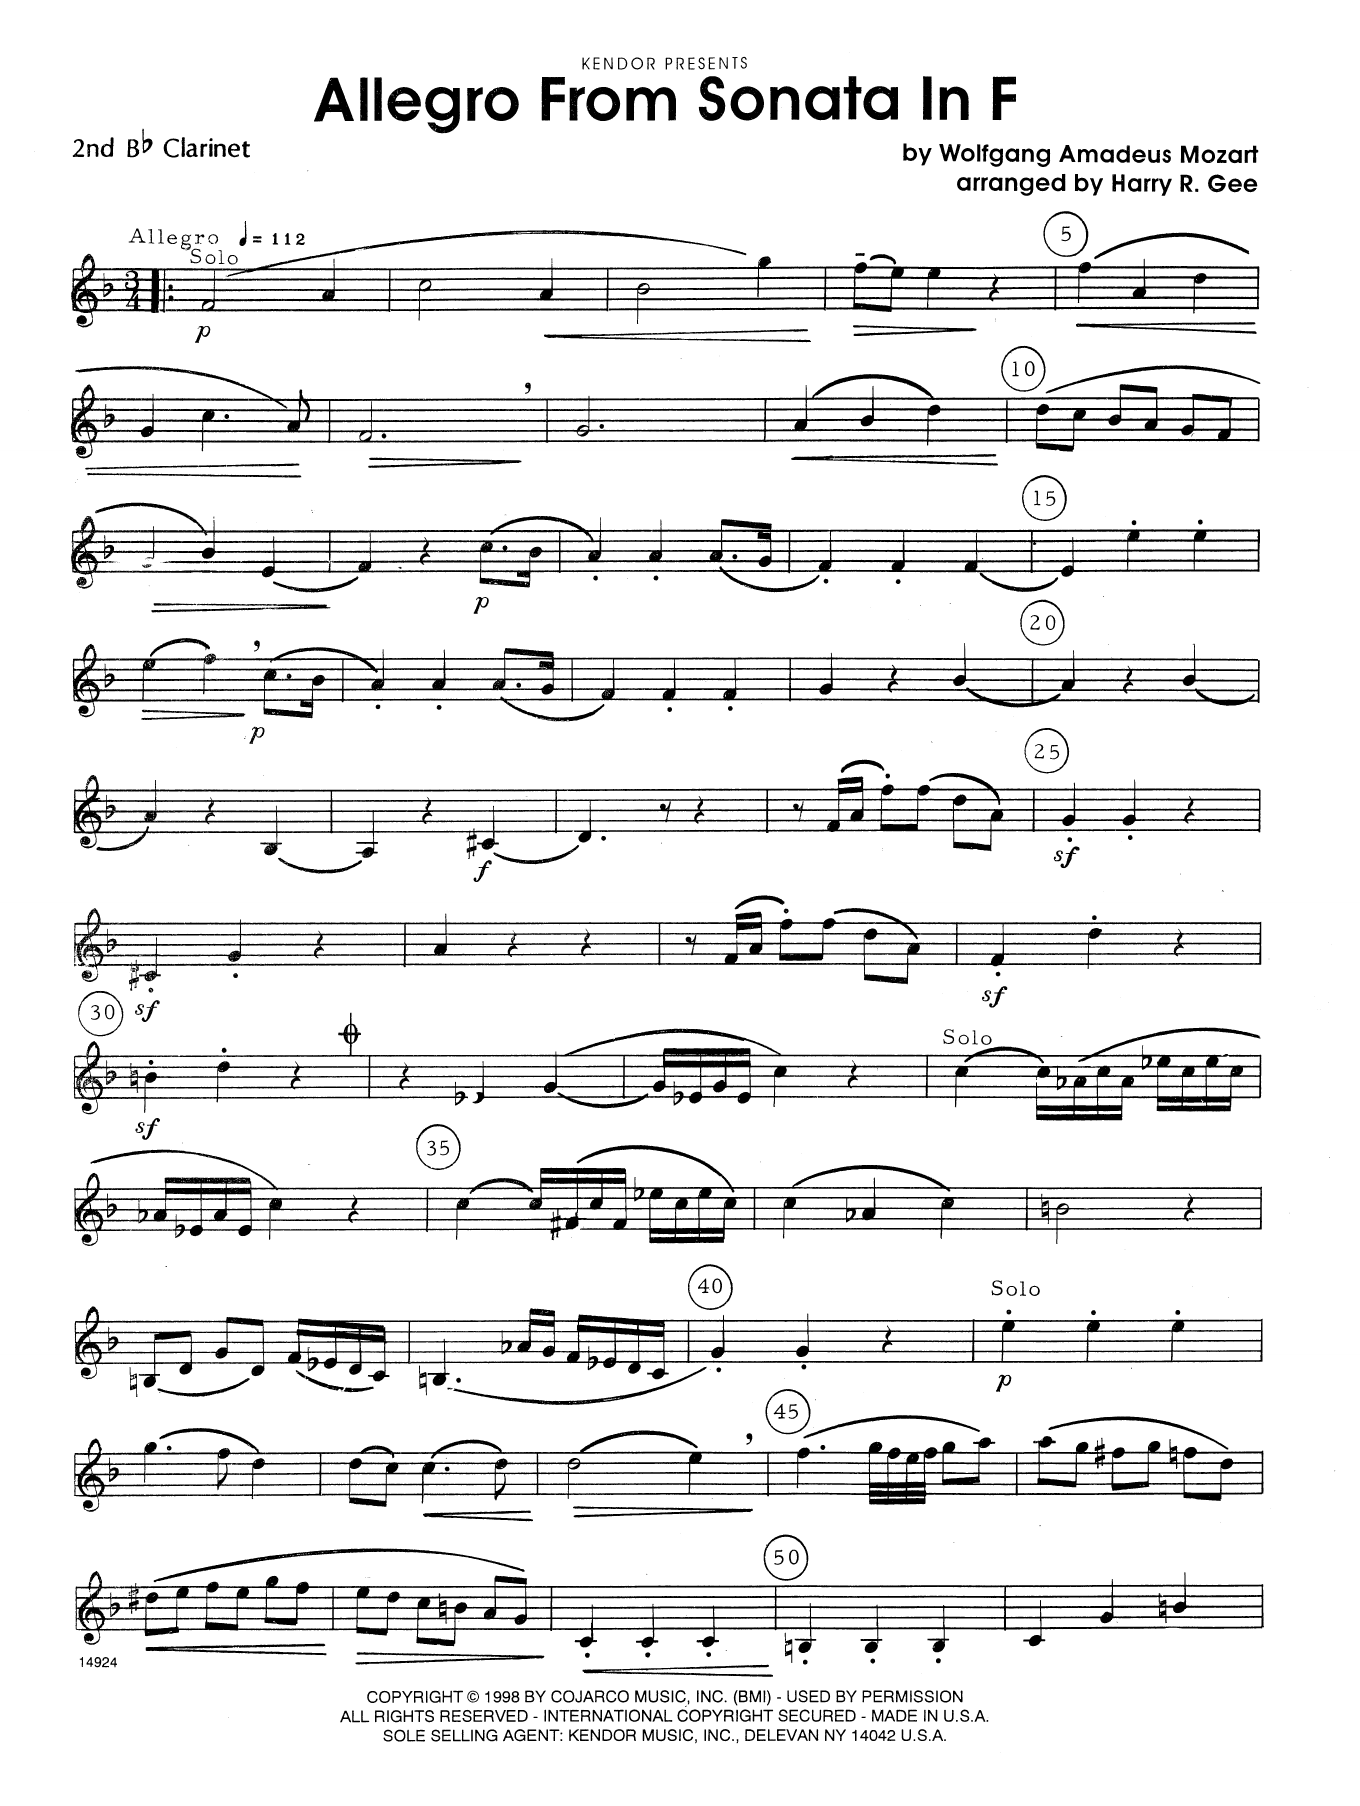 Download Harry Gee Allegro From Sonata In F - 2nd Bb Clari Sheet Music